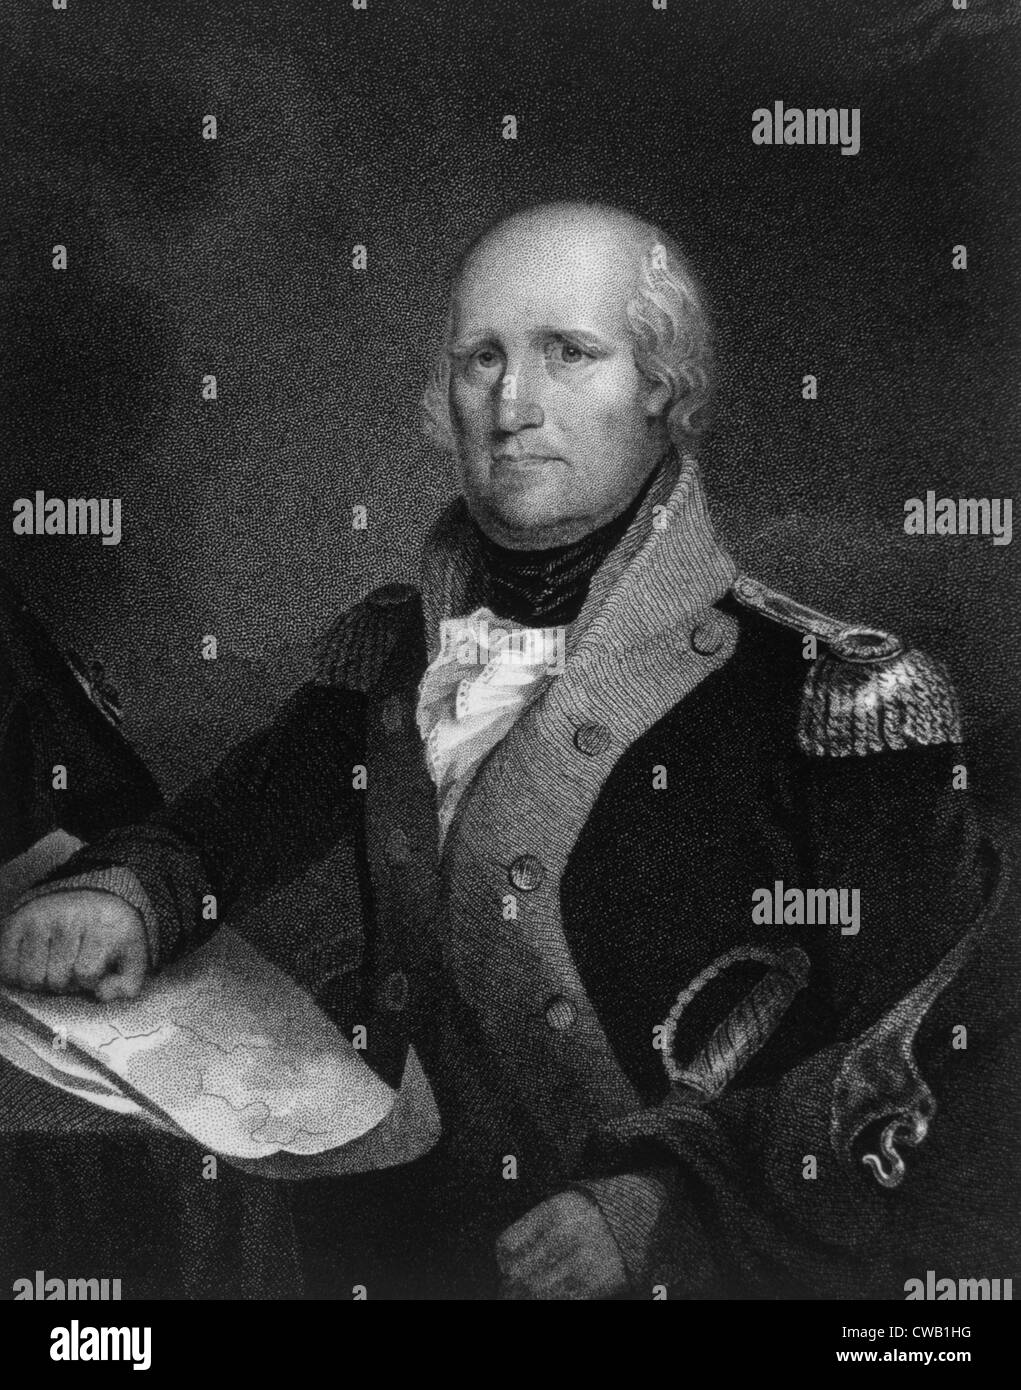 General George Rogers Clark (1752-1818), engraving from 1959 Stock Photo